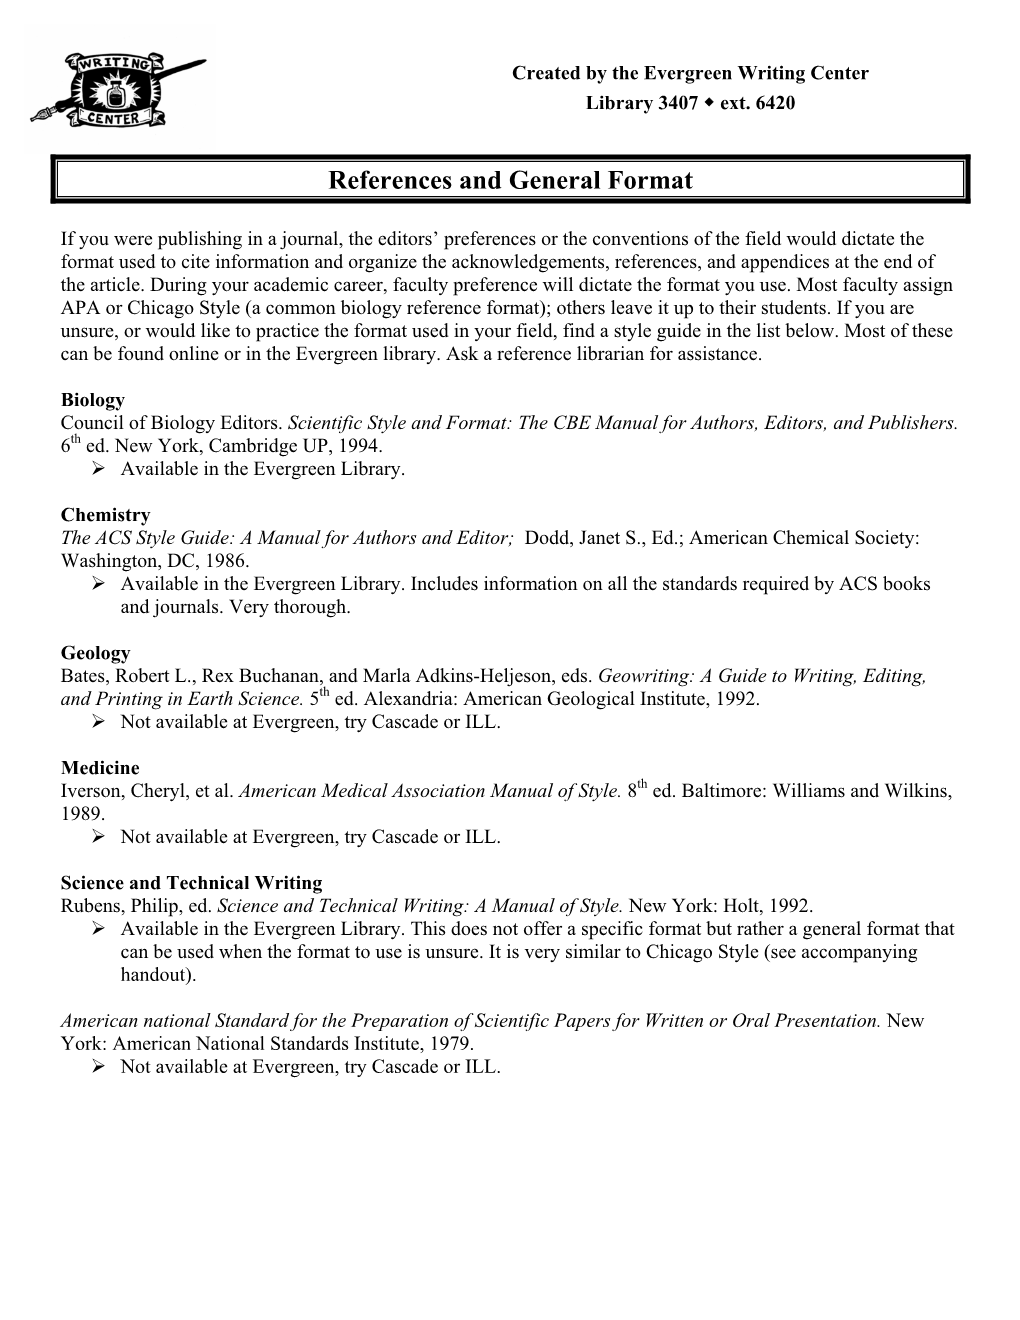 References and General Format (Pdf)